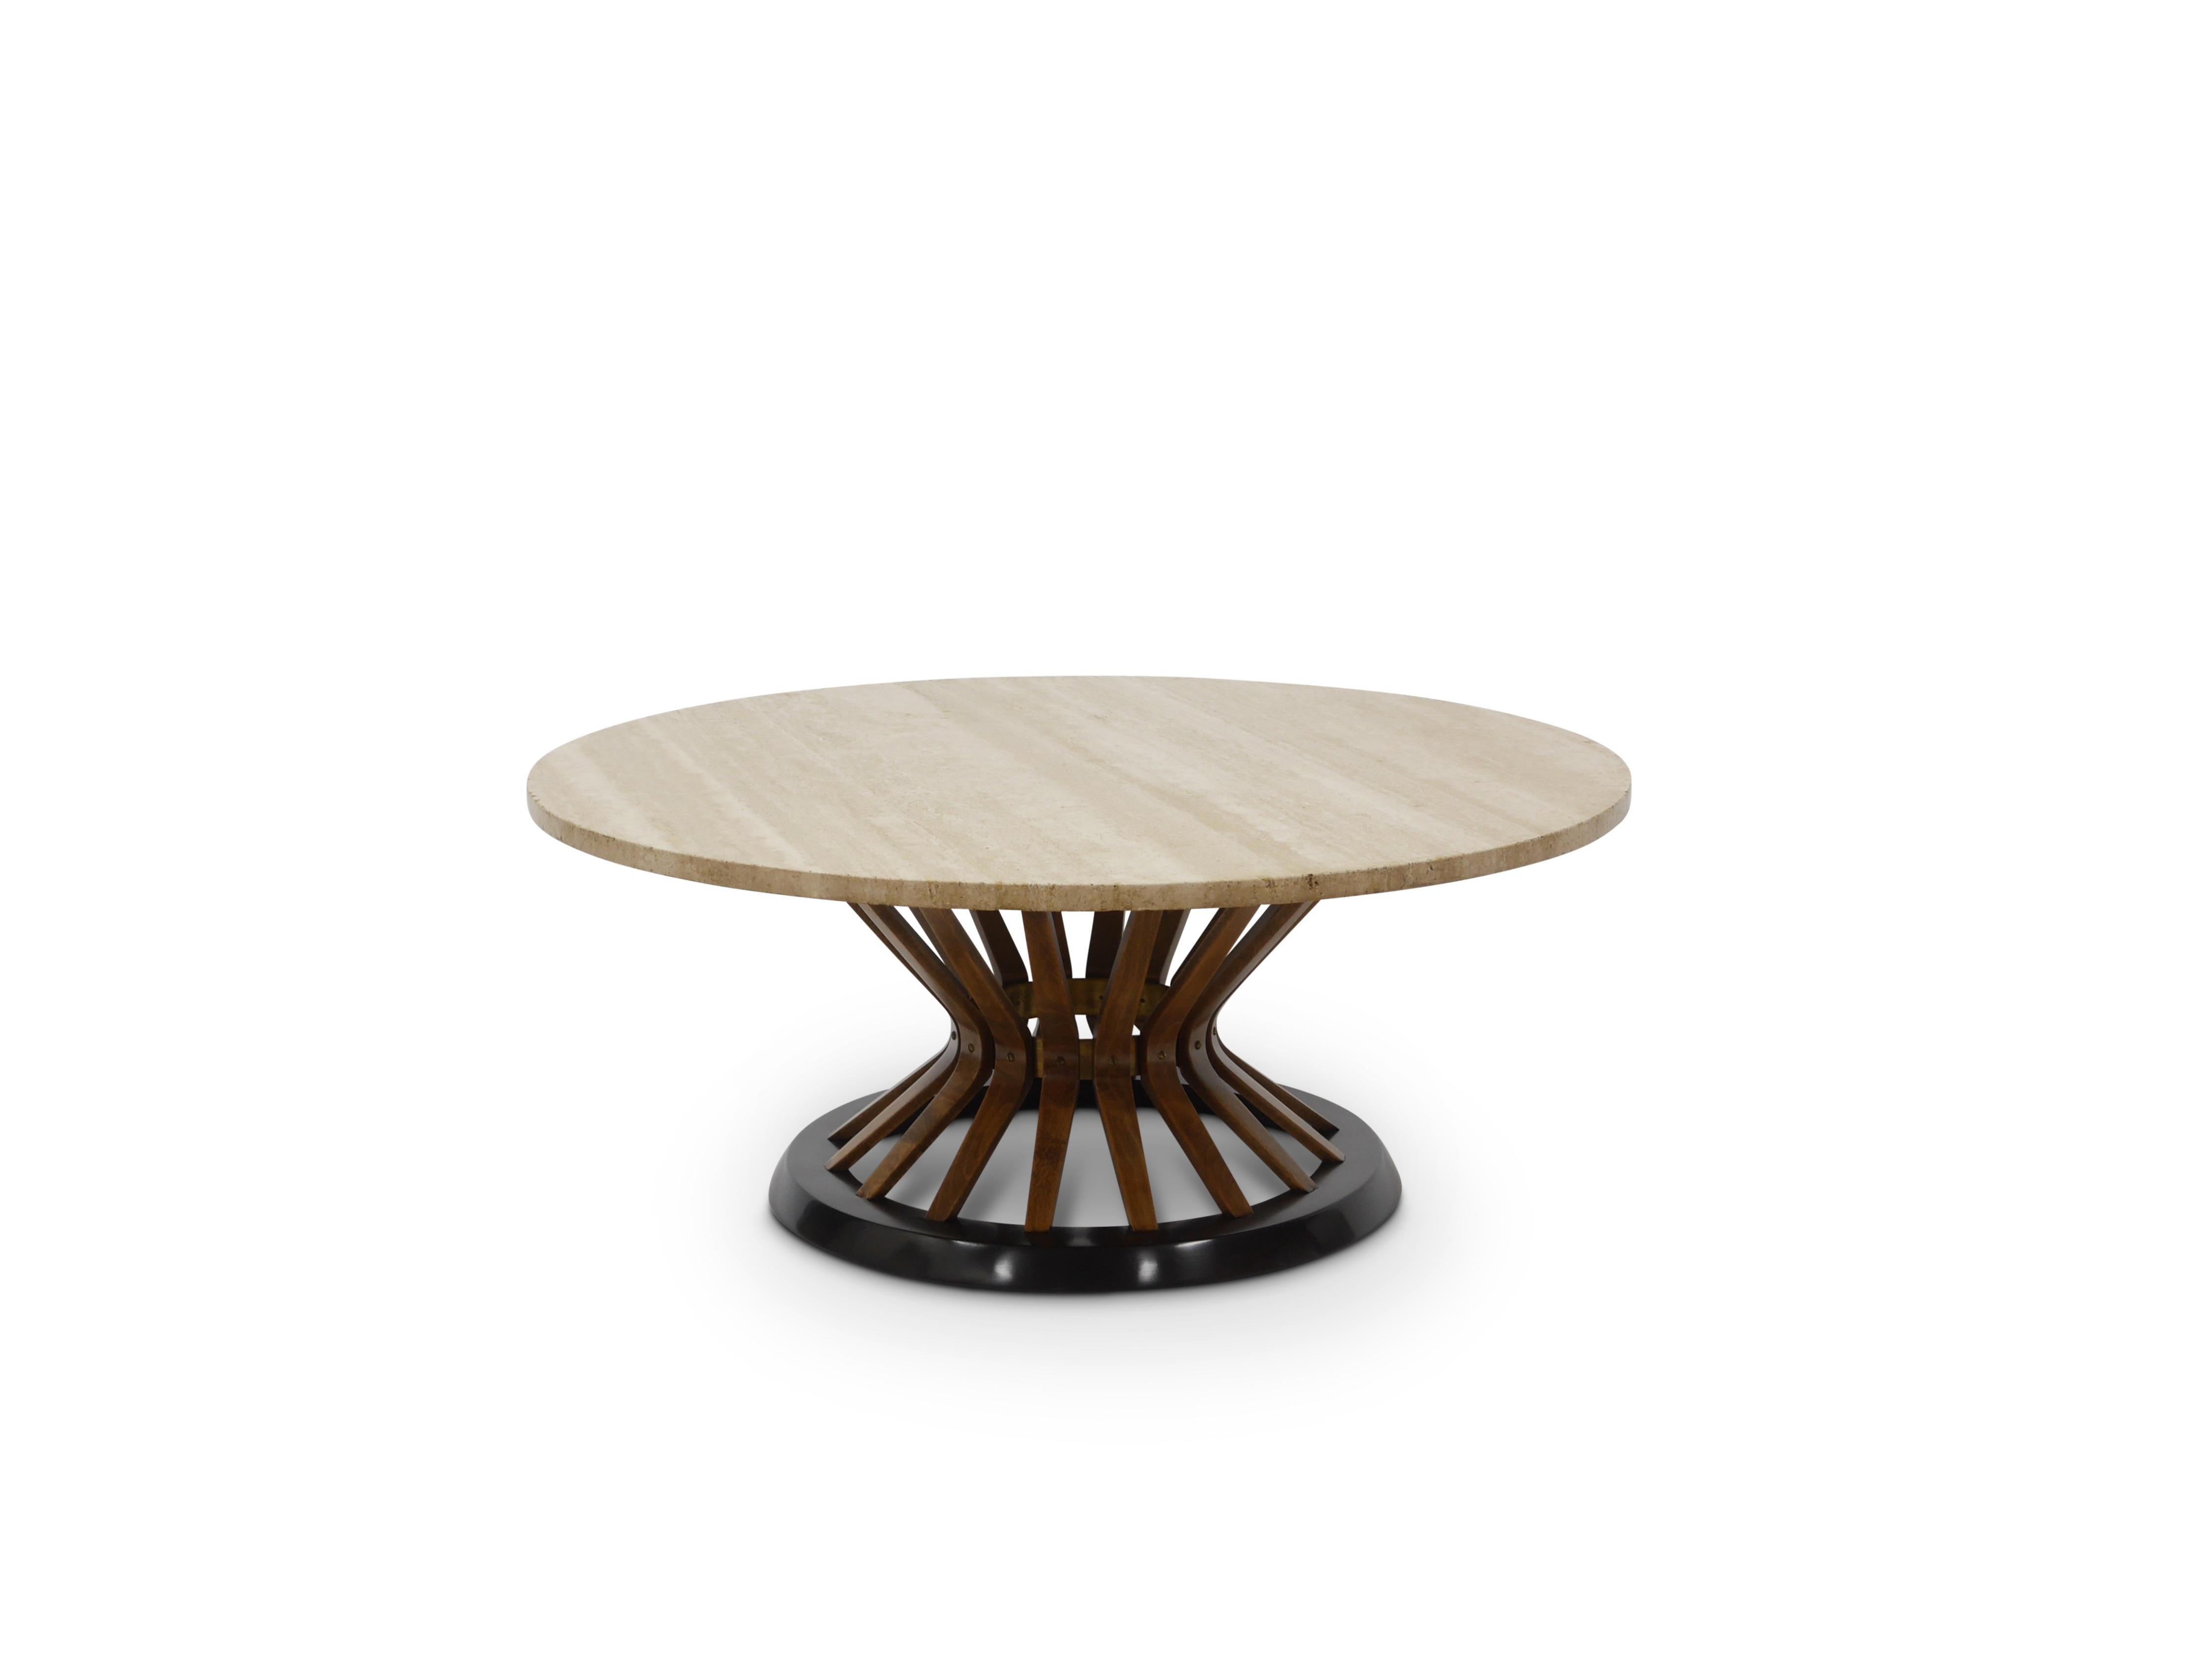 Mid-20th Century Edward Wormley Travertine Cocktail Table For Sale